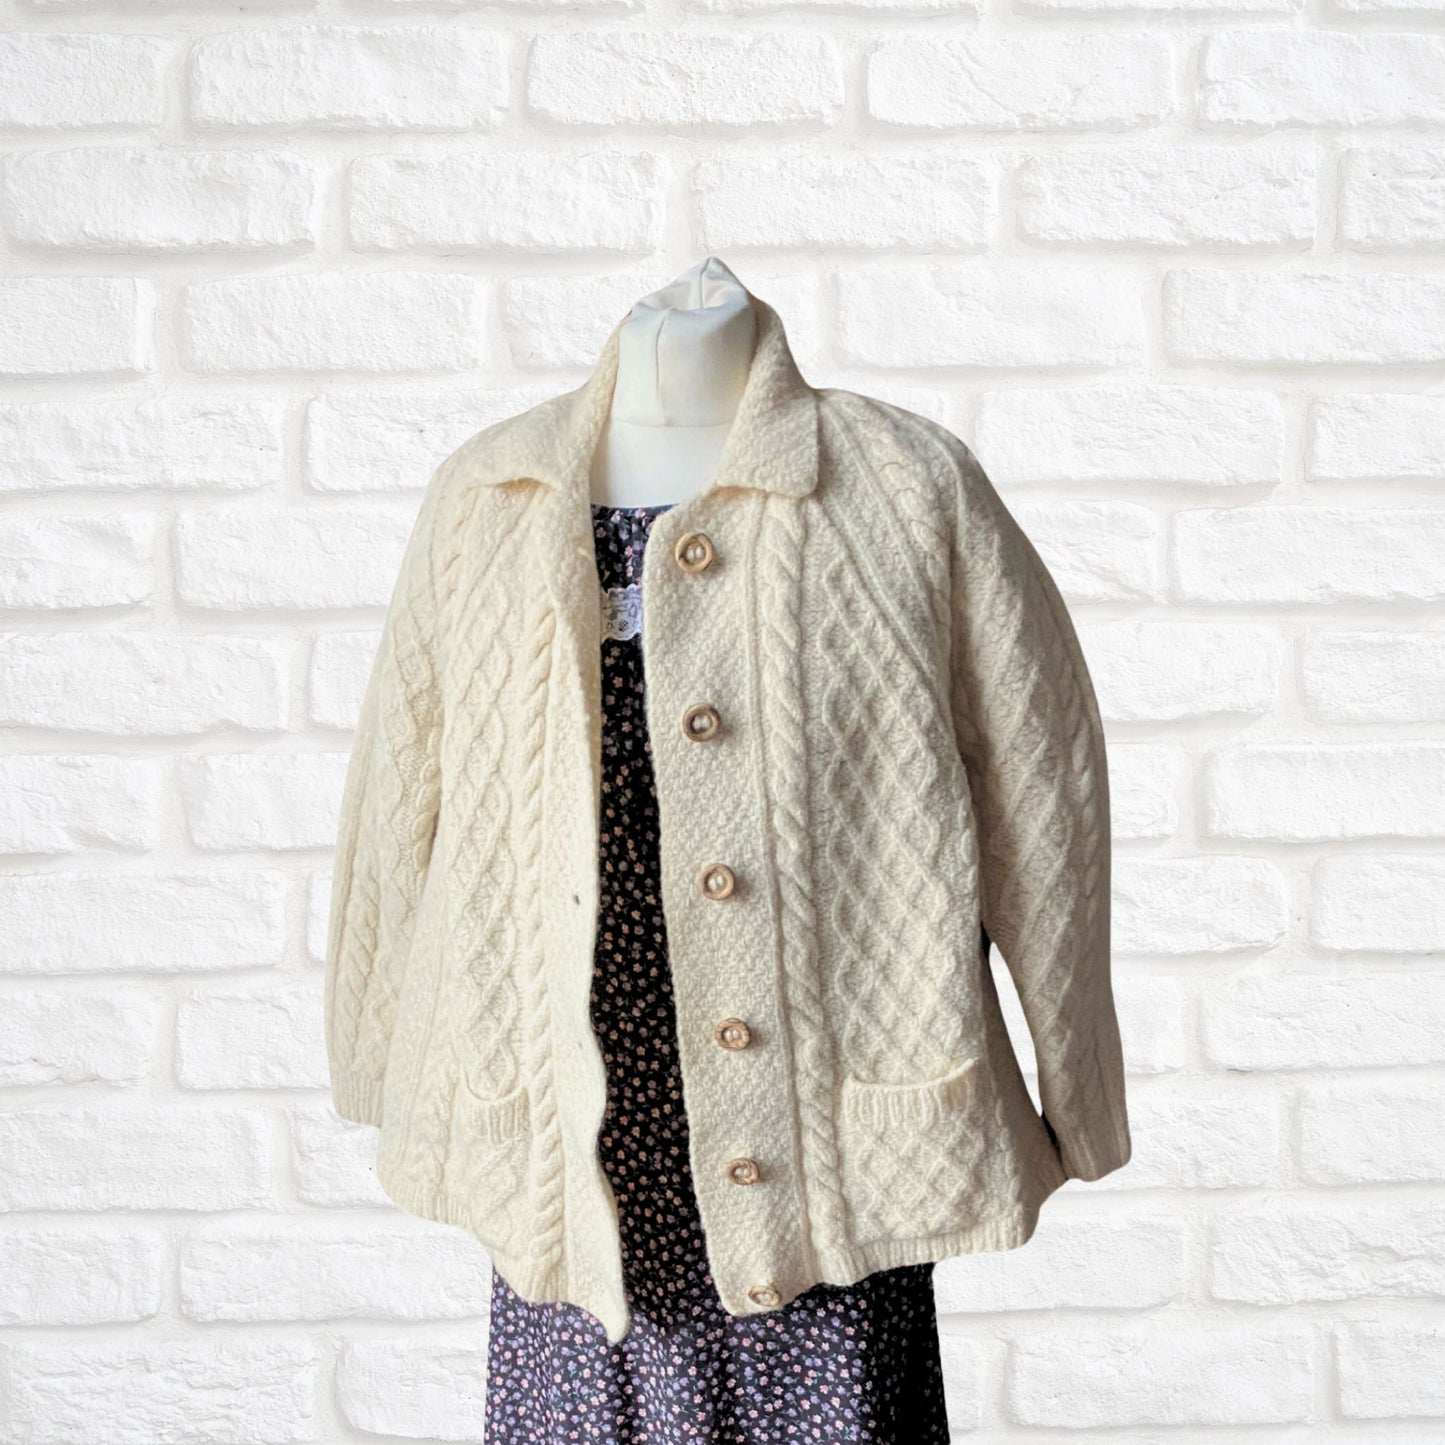 Cream Aran style Wool Vintage Cardigan with Wooden Buttons - Classic heritage piece.  Approx UK size 10- 14